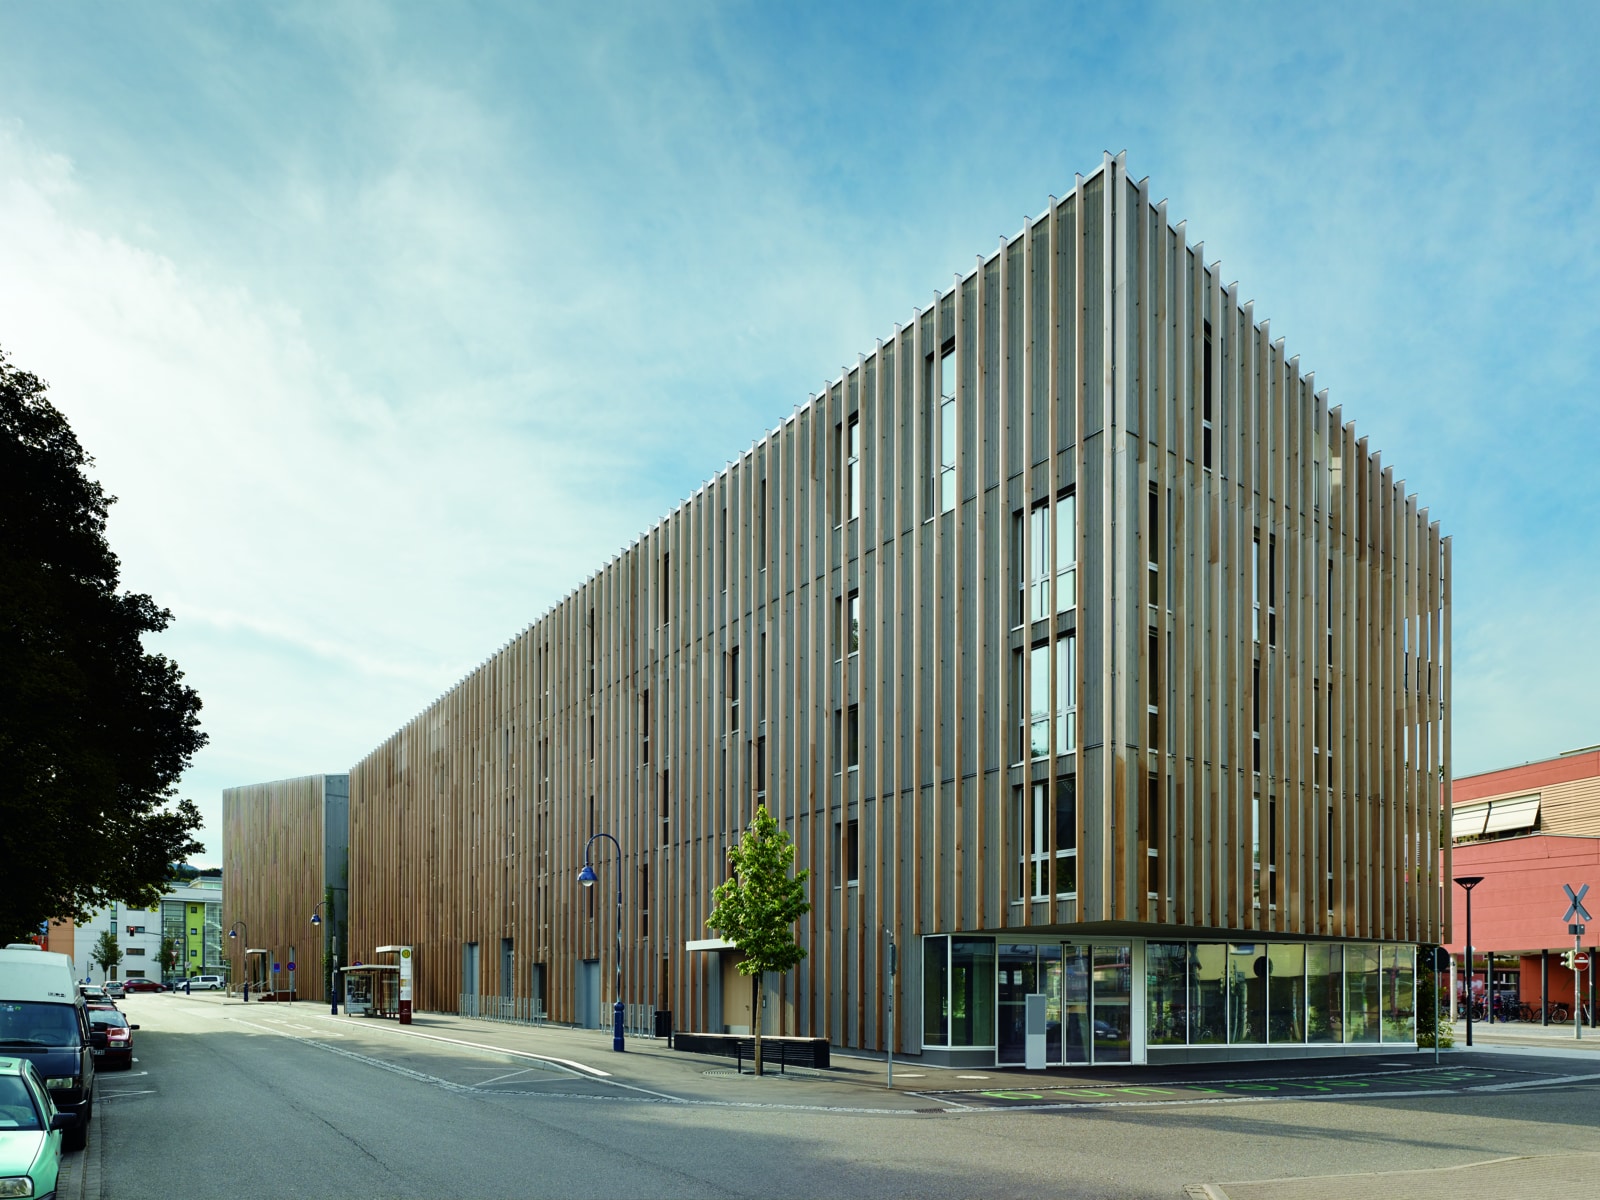 Image of a mixed use building with a wood facade